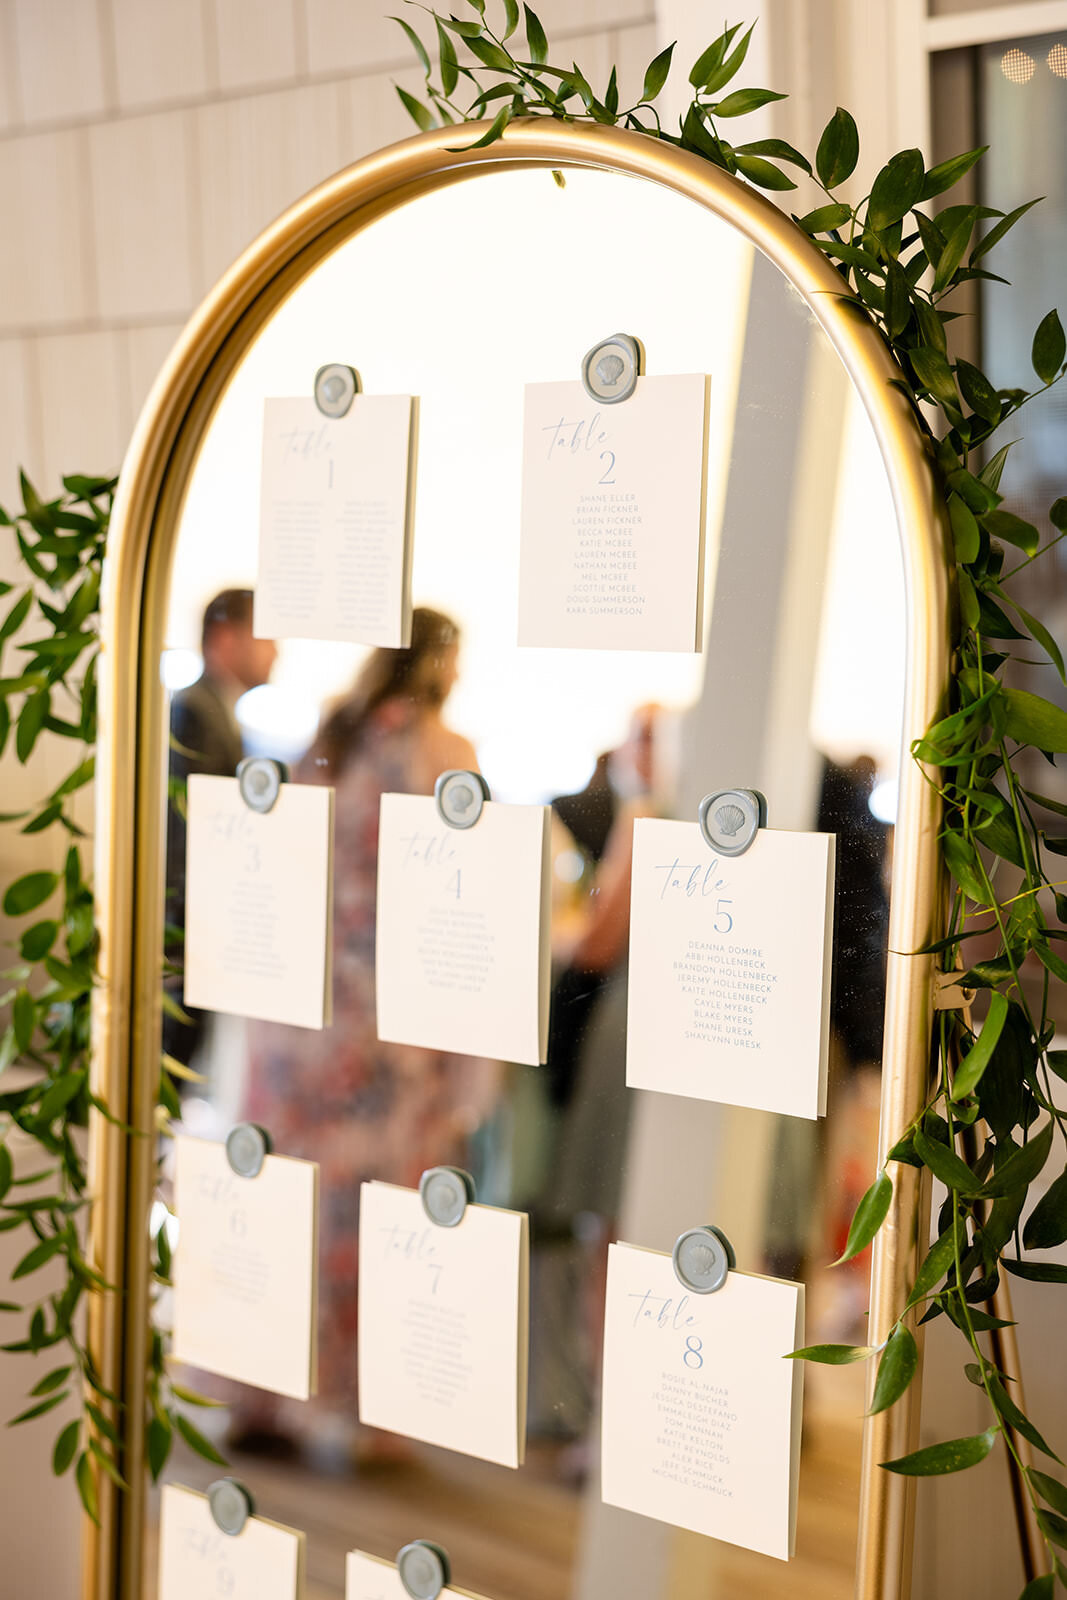 A seating arrangement display on a gold-framed mirror adorned with greenery, with wedding guests reflected in the background.